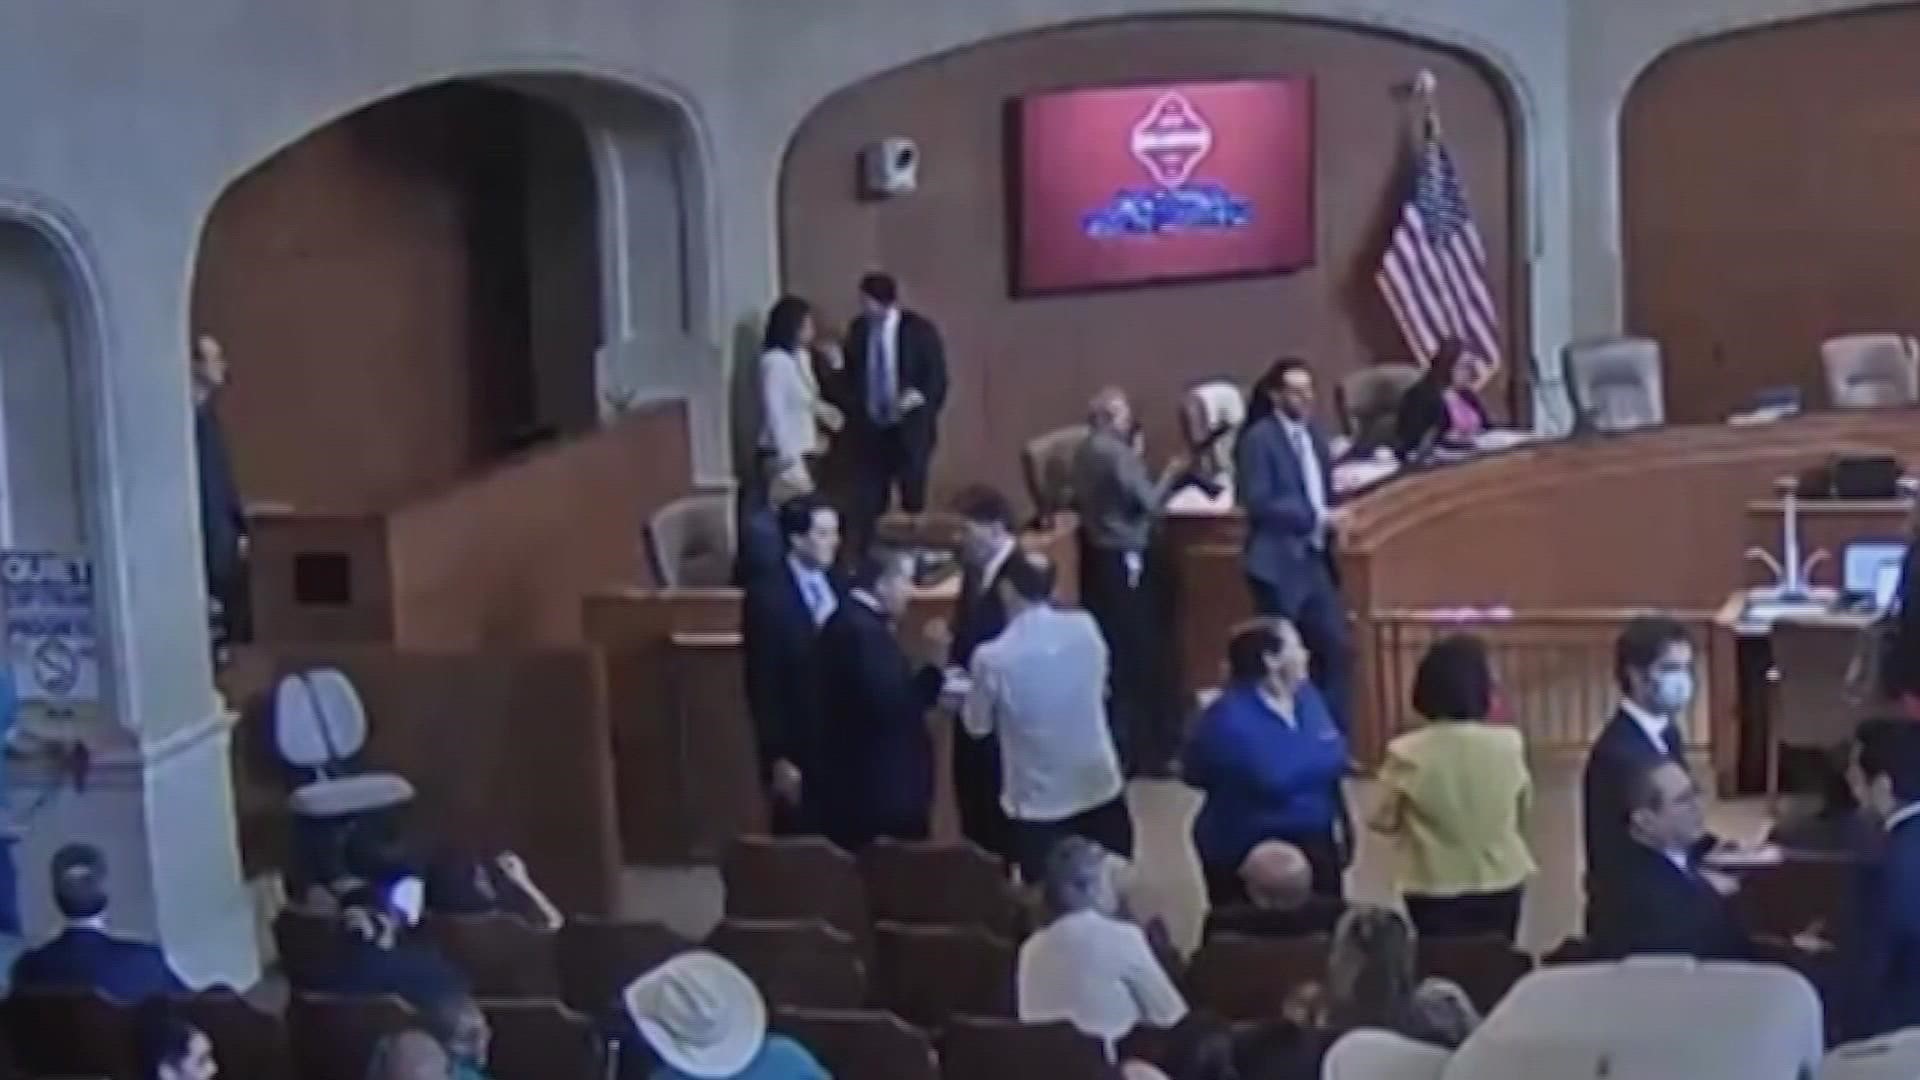 The video shows Mario Bravo and Councilwoman Ana Sandoval inside the city council chambers.